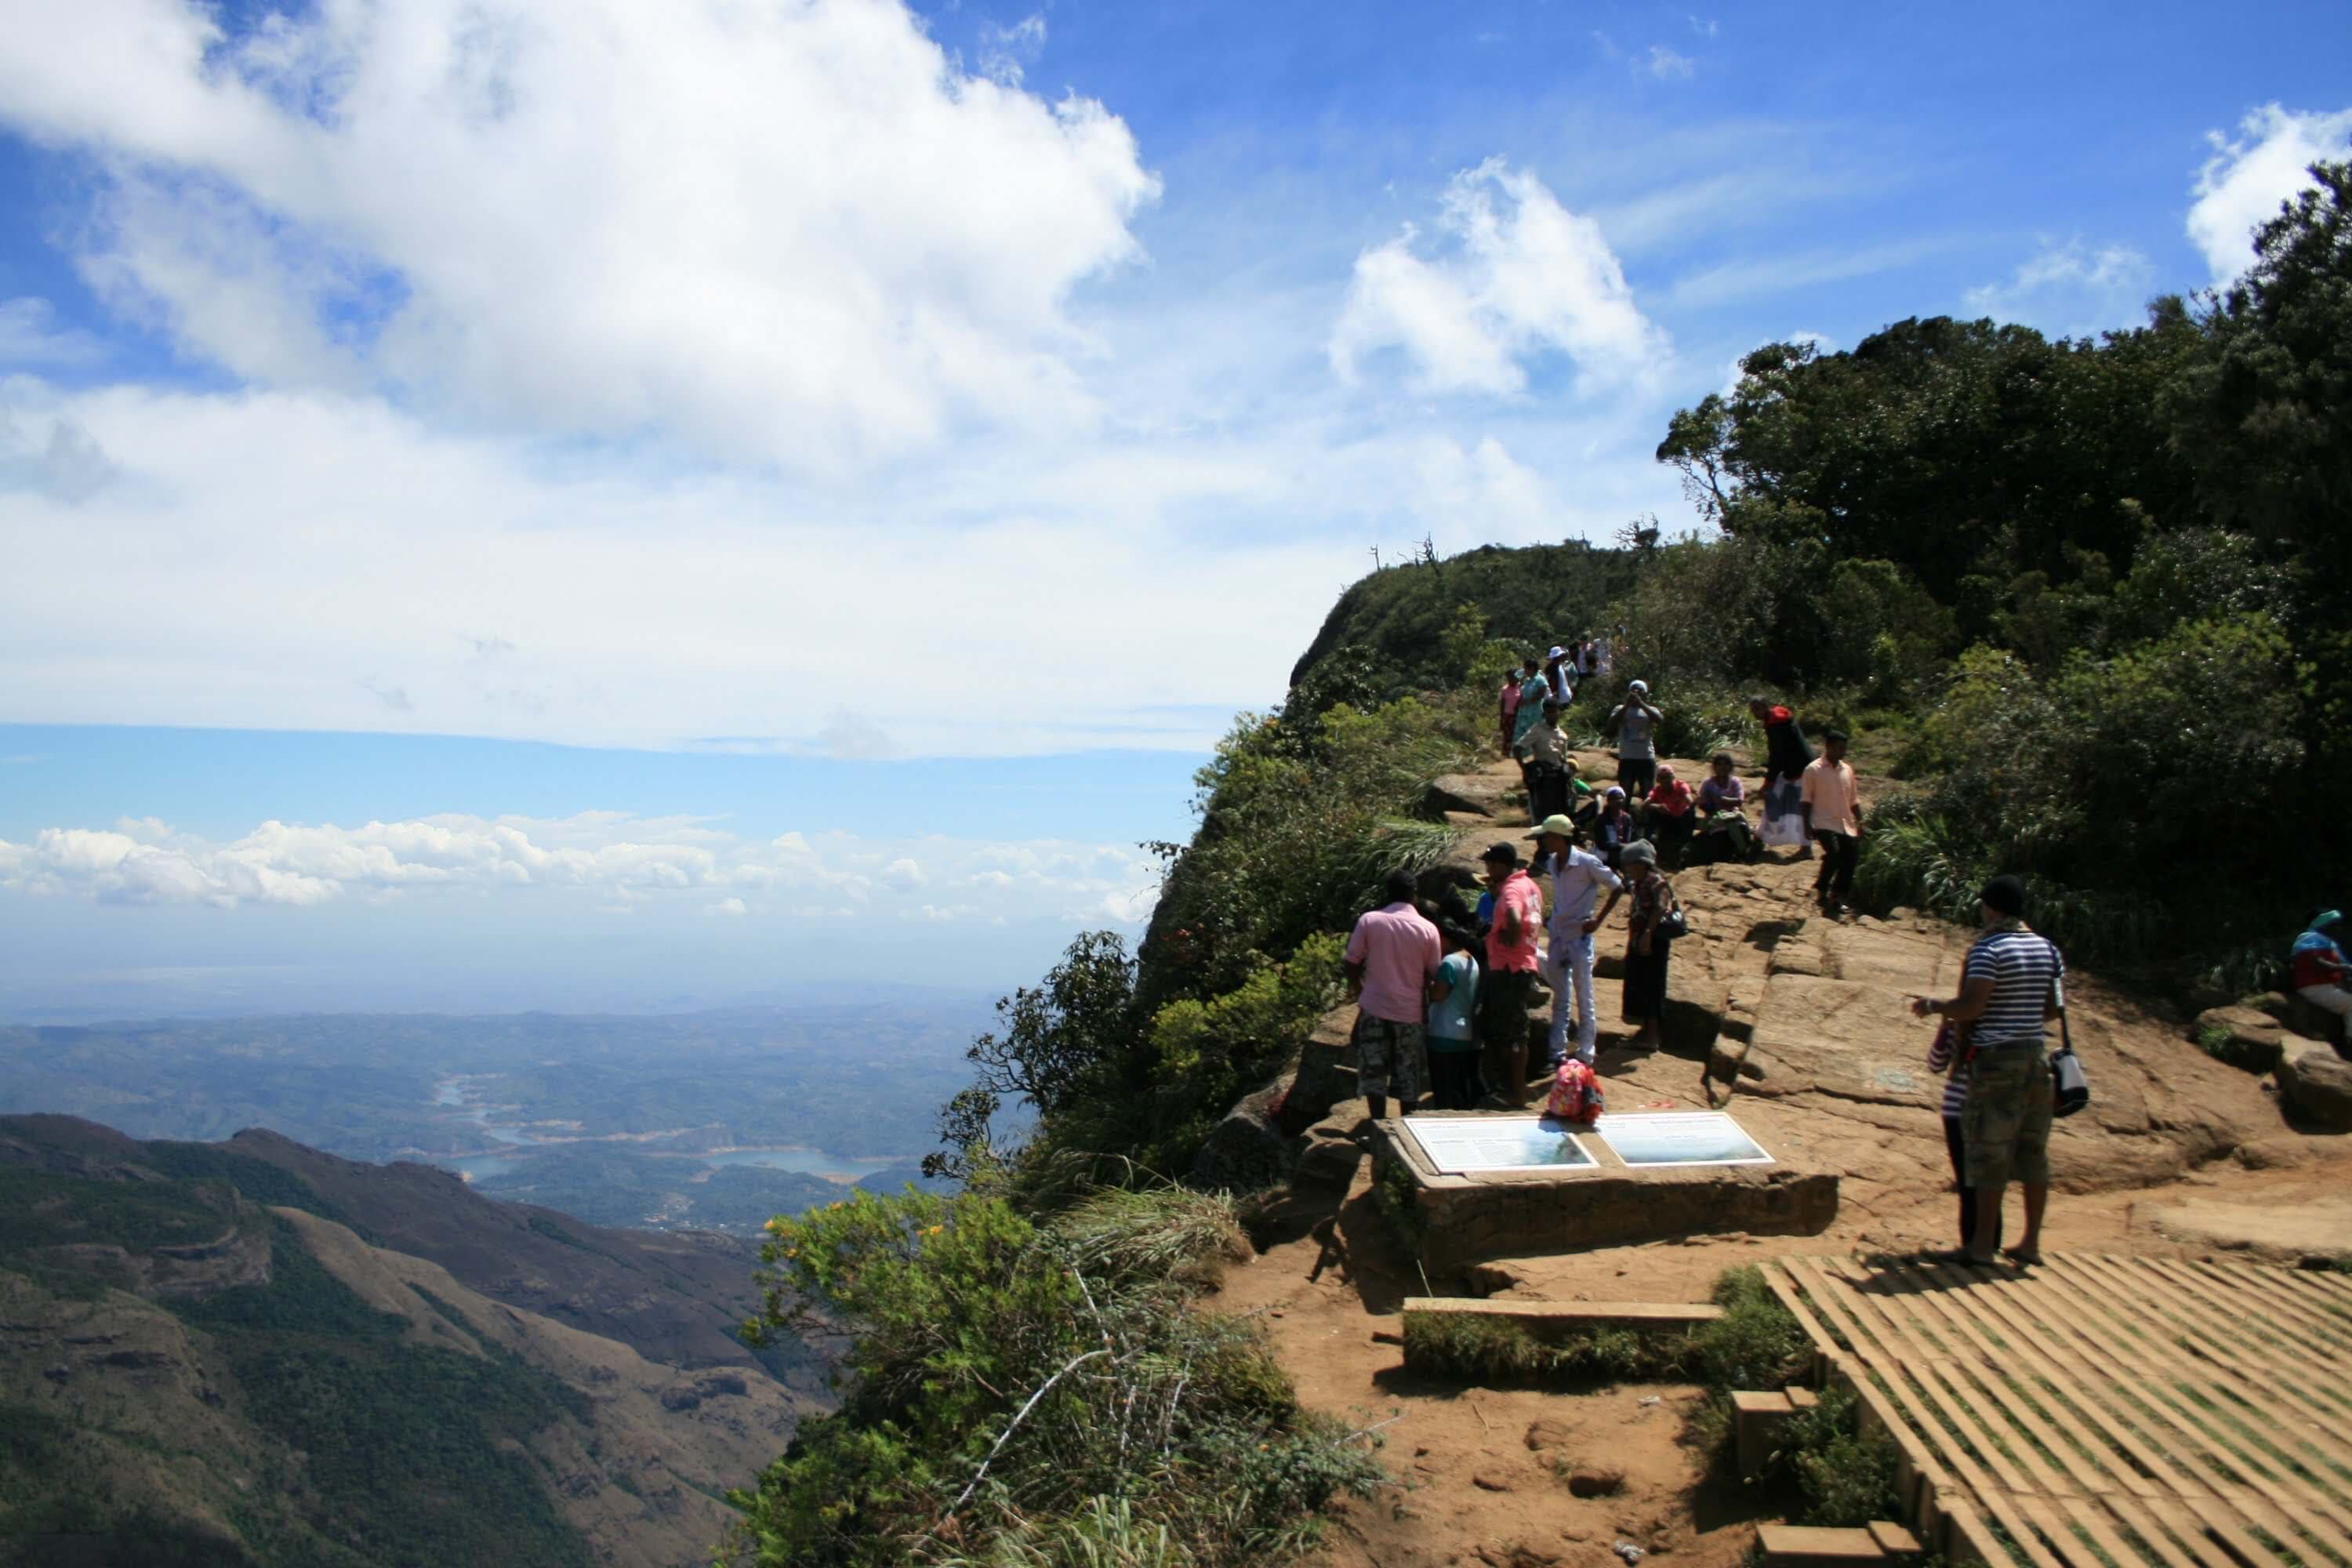 A view of Stunning landscapes in Horton Plains Sri Lanka